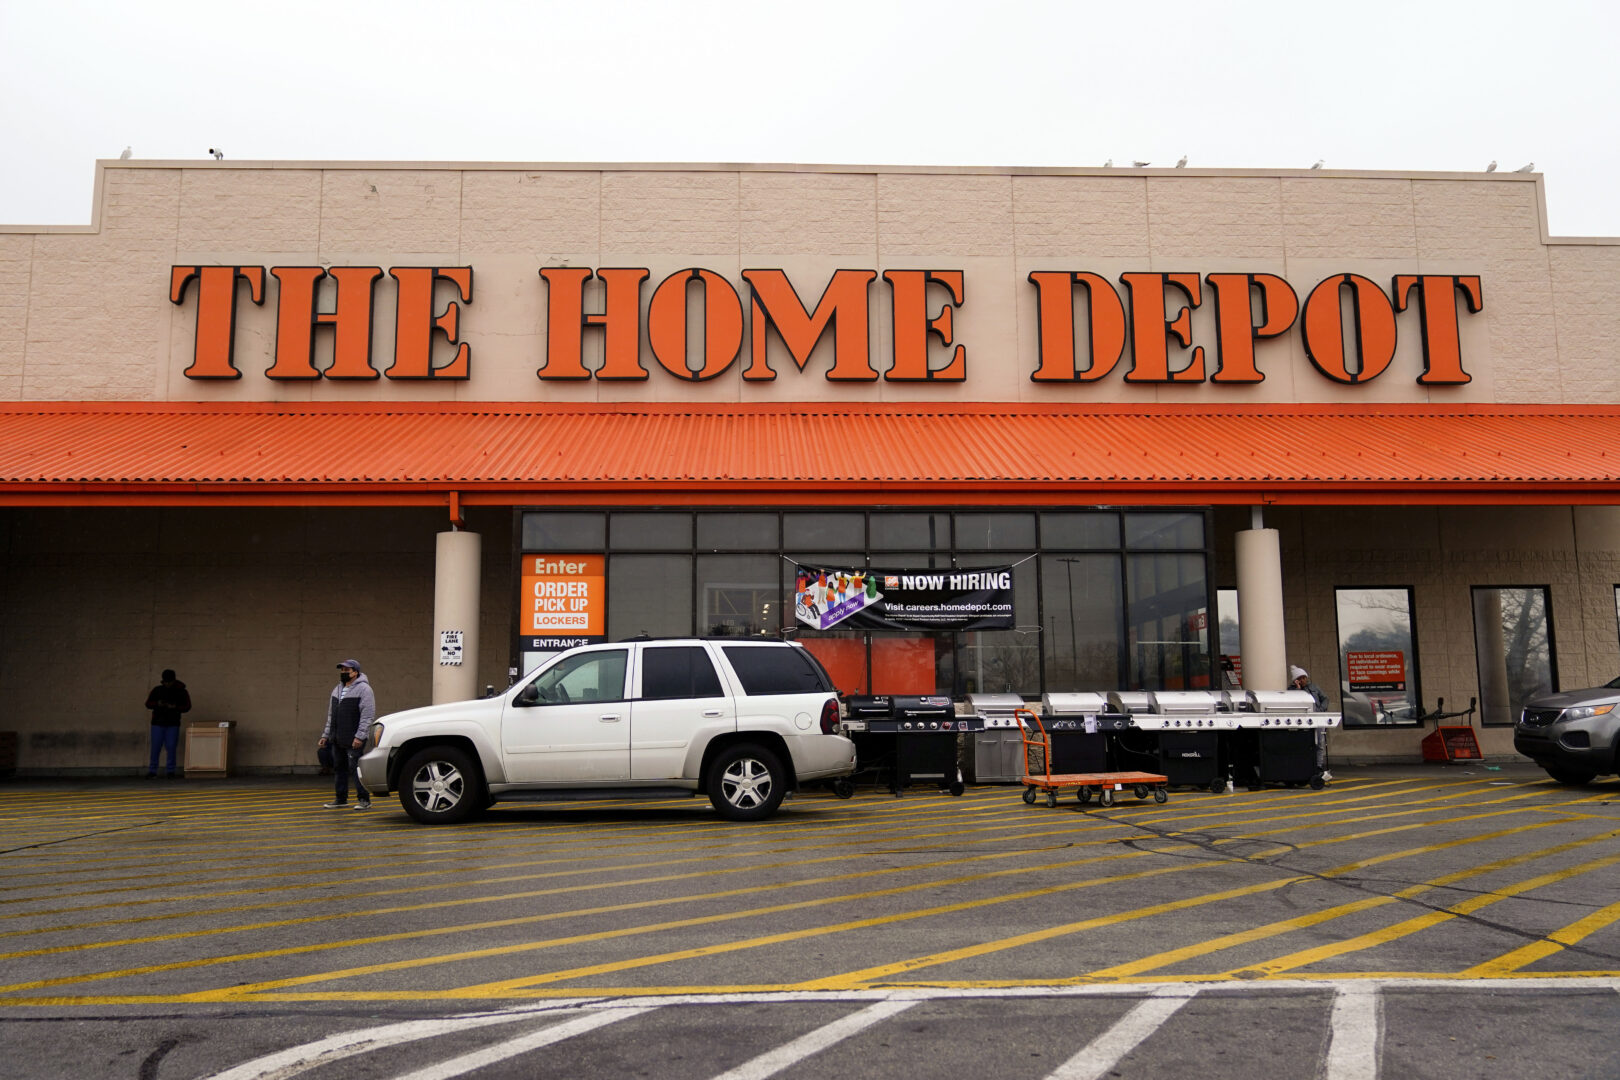 FILE - The Home Depot improvement store is seen in Philadelphia, Feb. 22, 2022. Home Depot workers in Philadelphia have filed a petition with the federal labor board to form what could be the first store-wide union at the world’s largest home improvement retailer. The petition, filed with the National Labor Relations Board, seeks to form a collective bargaining unit for 274 employees who work in merchandising, specialty and operations.